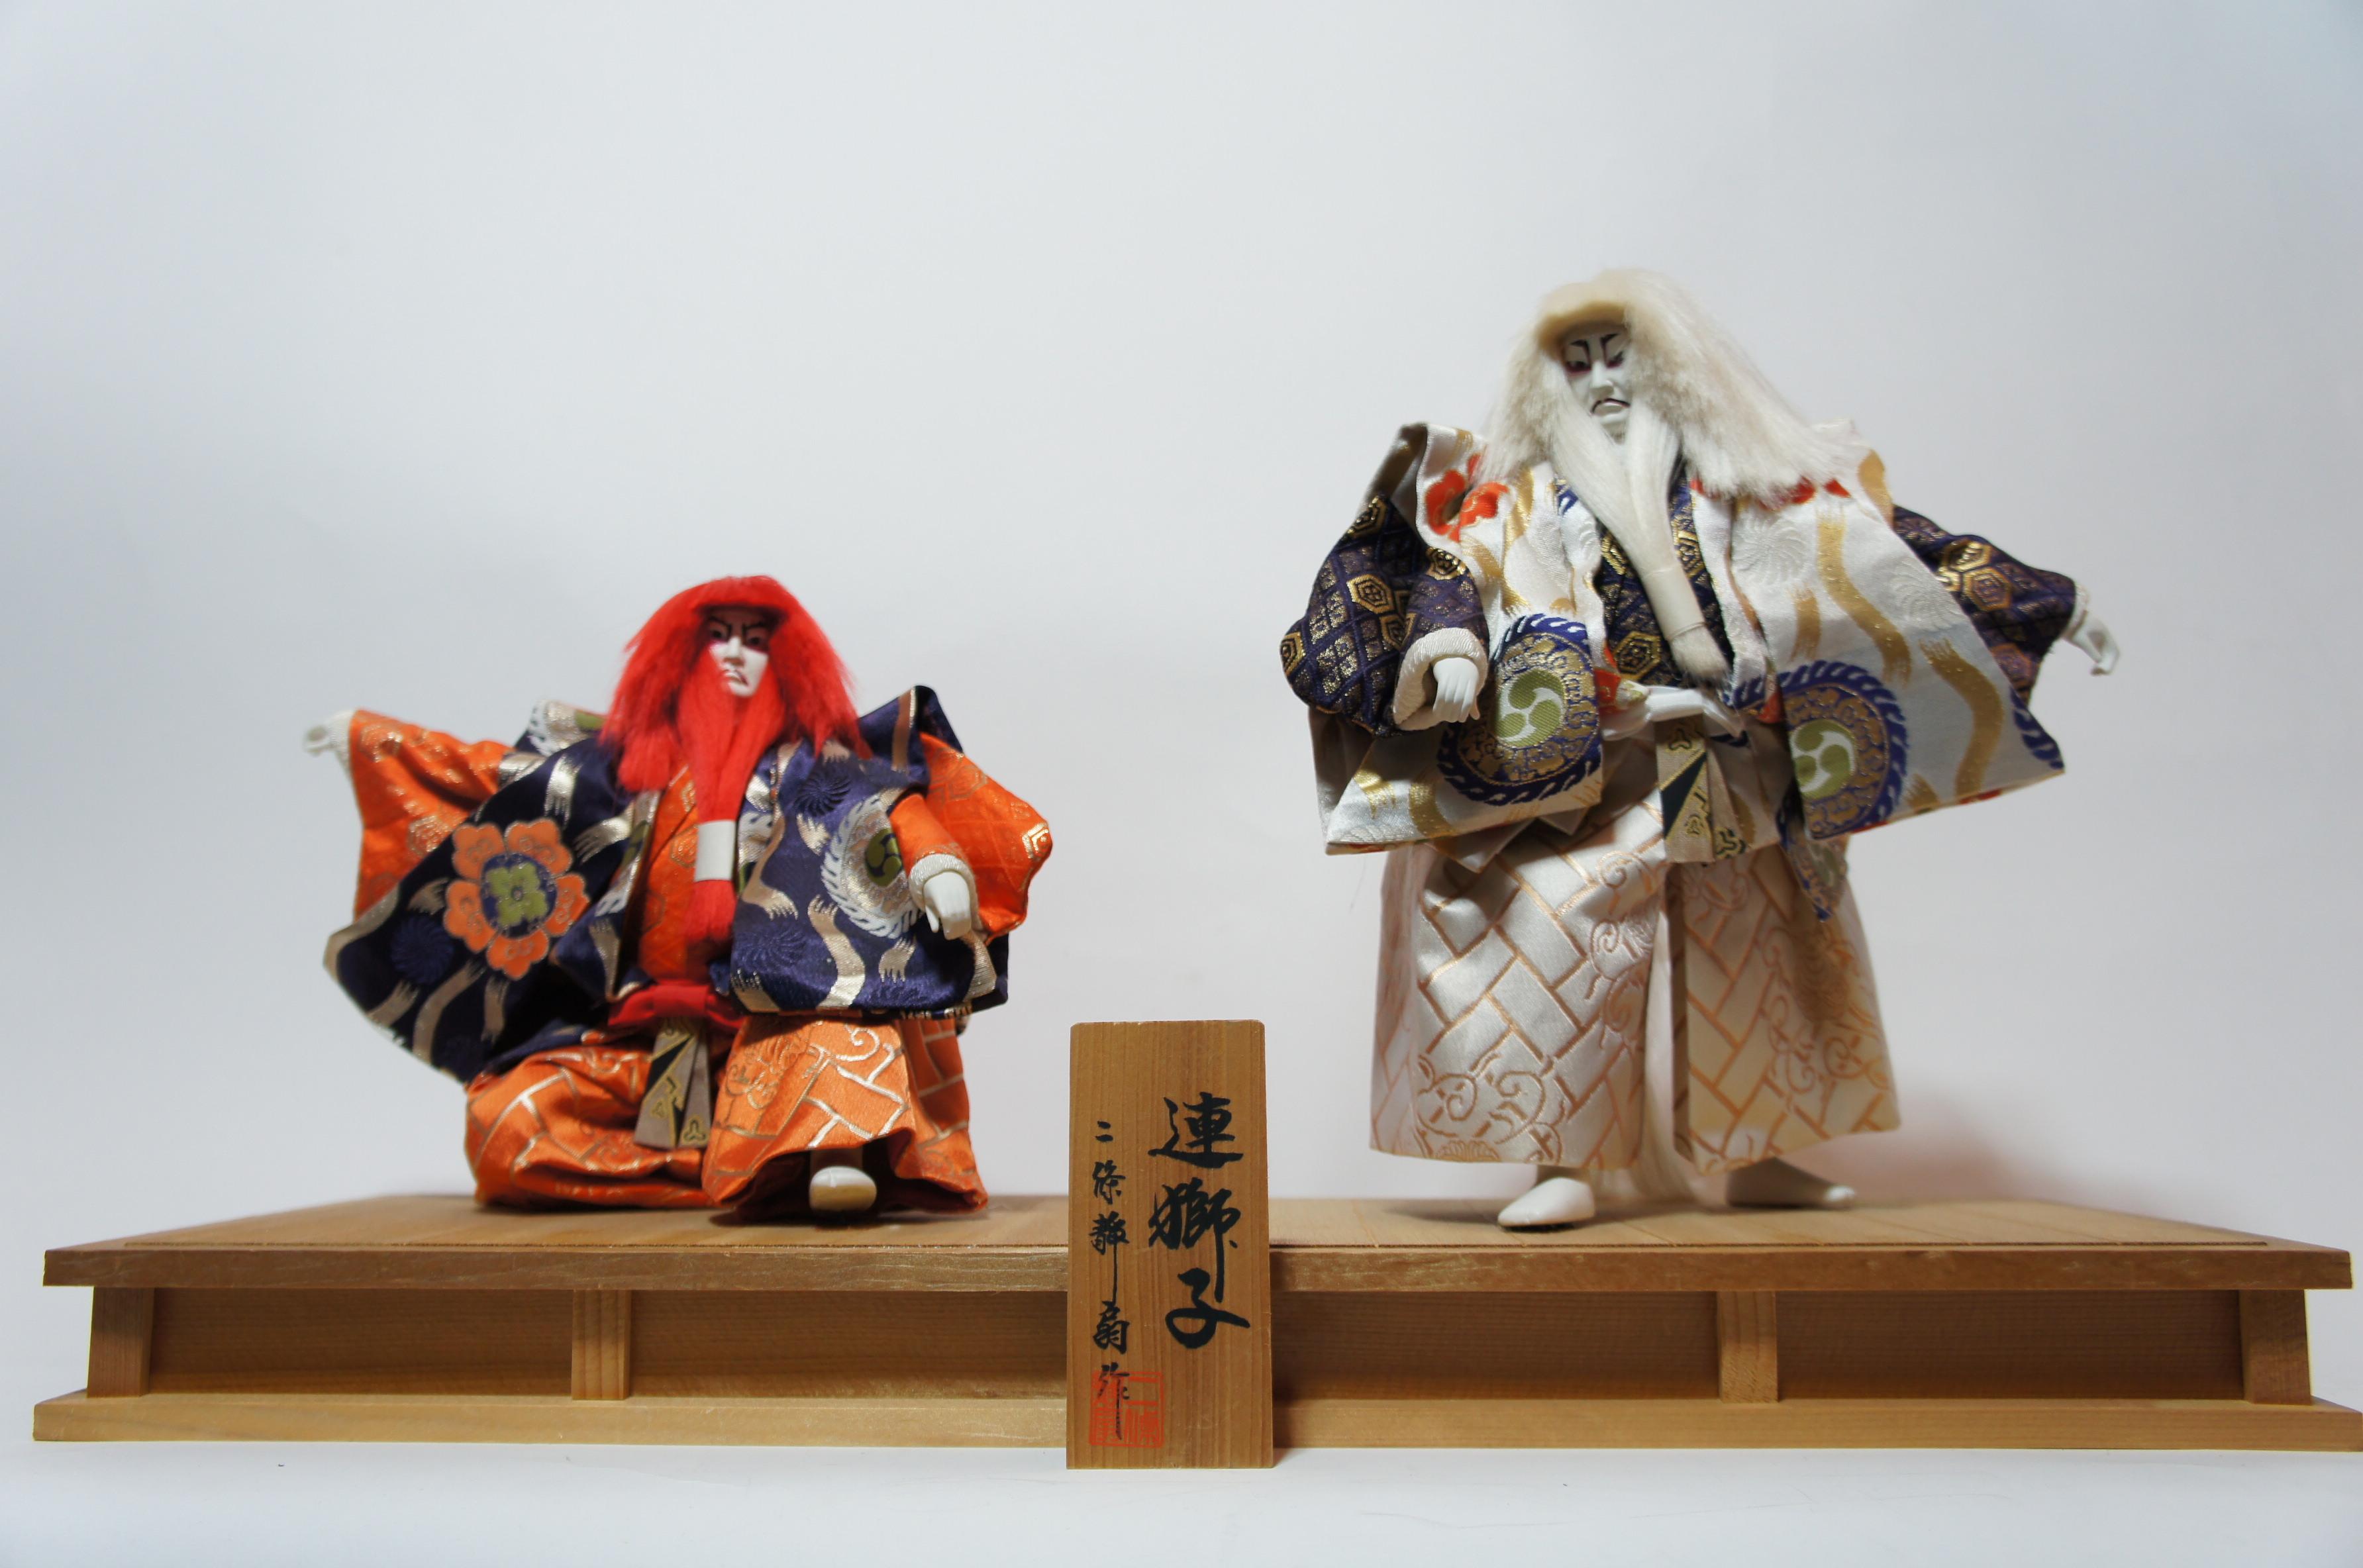 Renshishi / Lion Dancer is traditional Japanese kabuki play.
In the story of Renshishi, the father lion pushes his cub into an abyss to test his courage. The scene depicted by the dolls is the joyful dance of the father lion and his son who